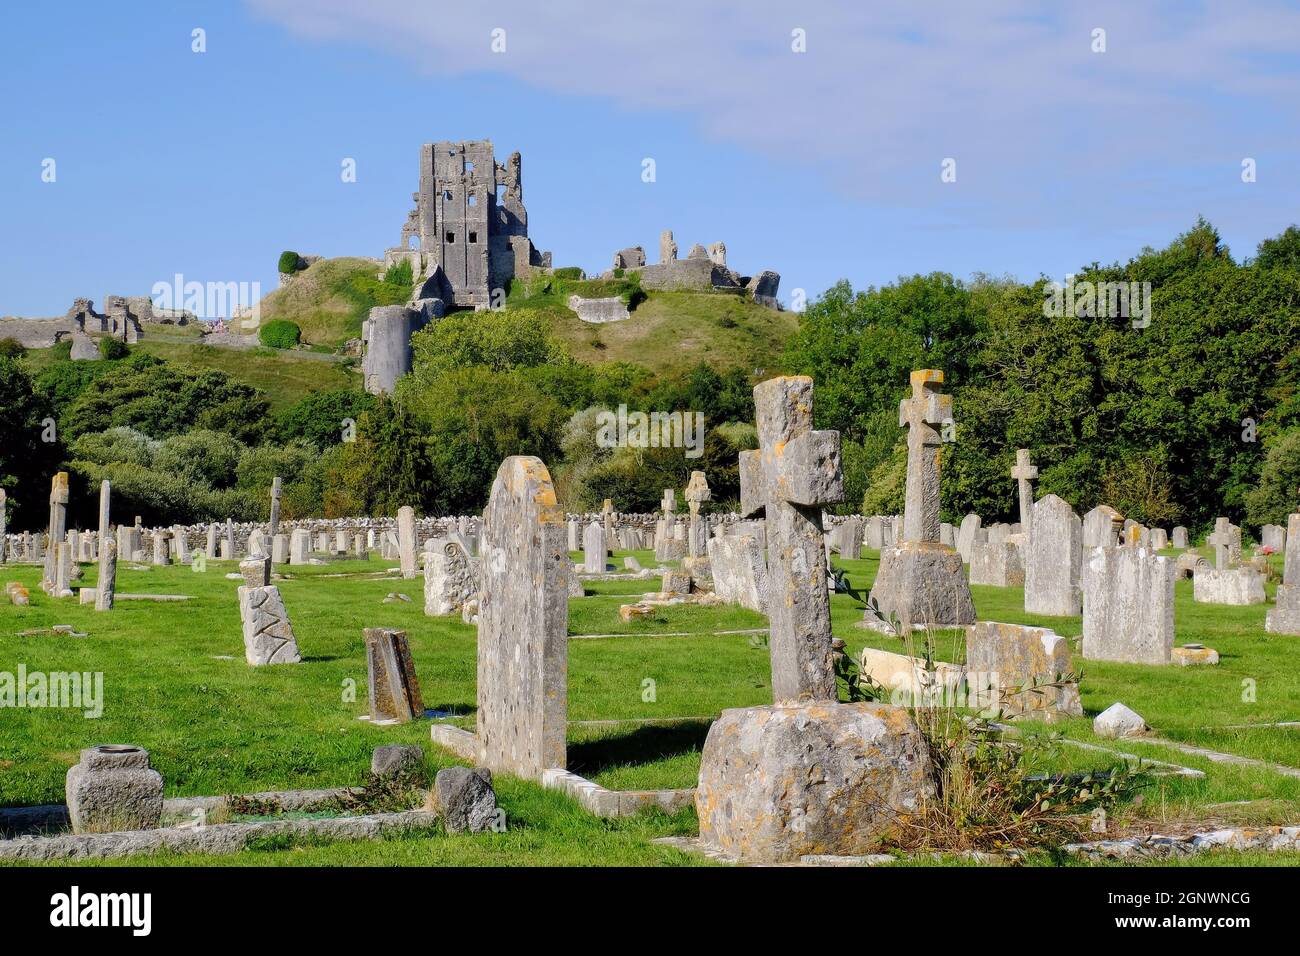 View of Corfe Castle and cemetery at Corfe Castle, Isle of Purbeck, Dorset, England Stock Photo